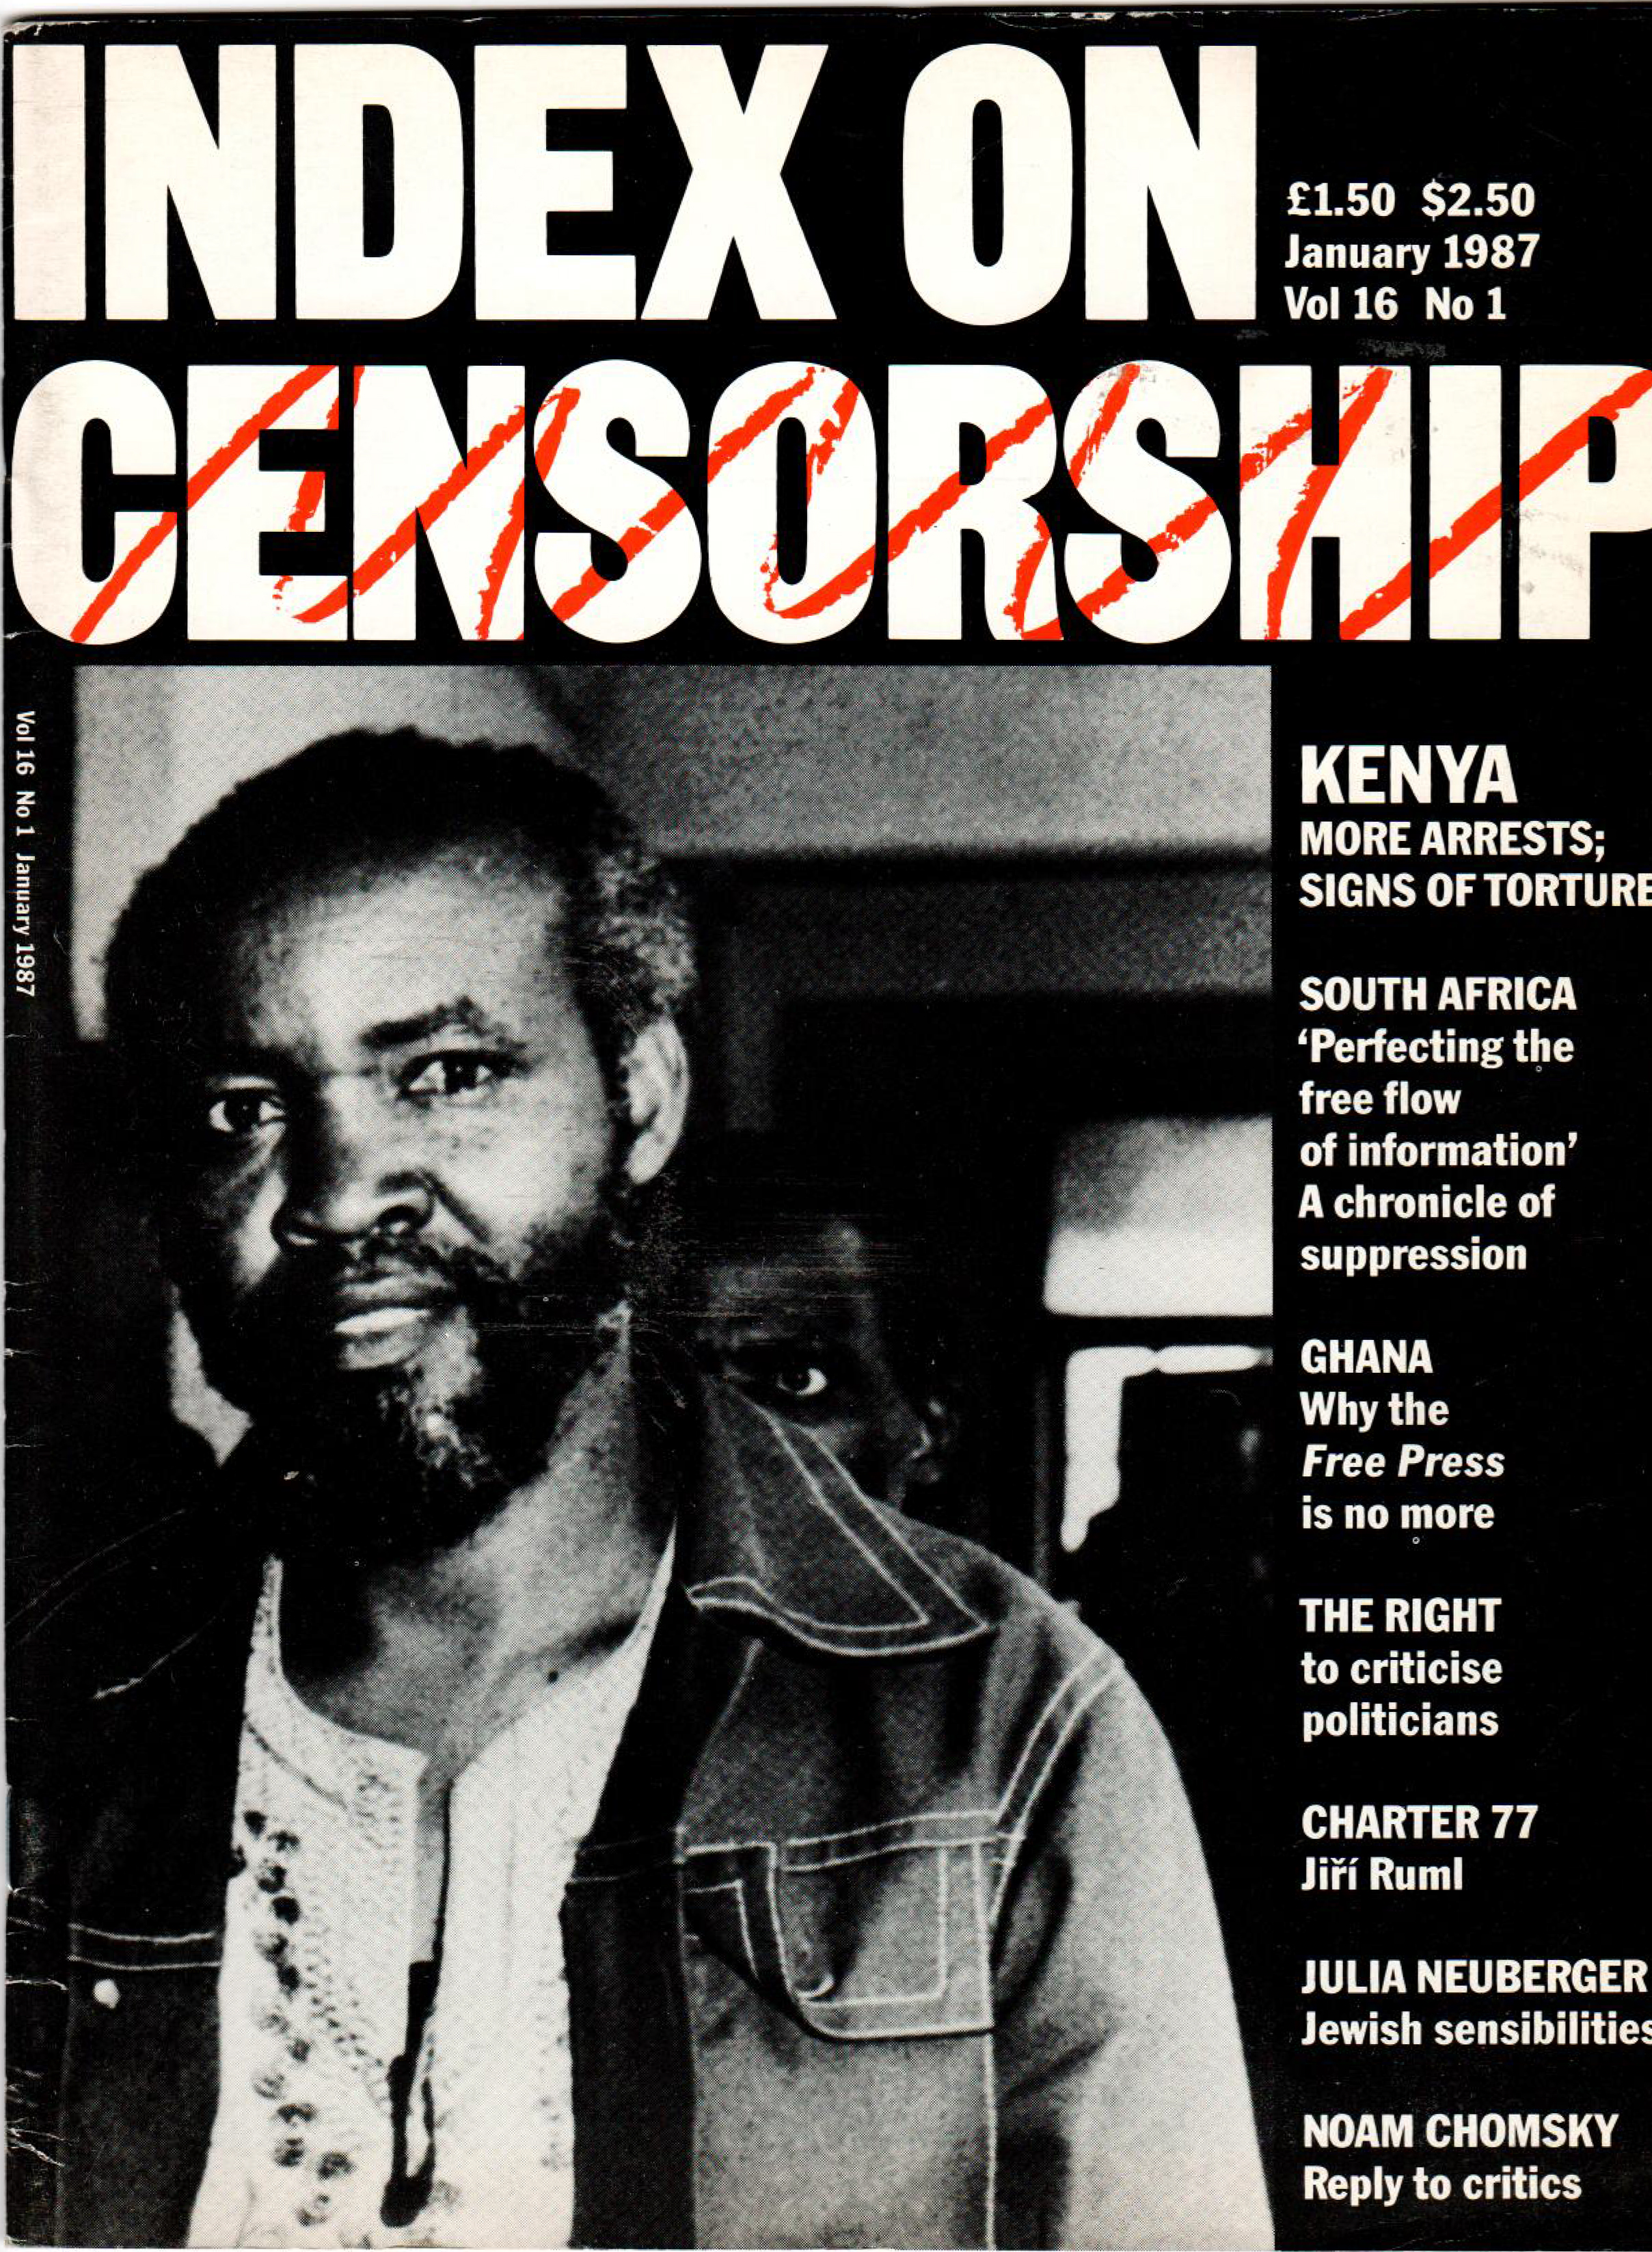 Kenya: more arrests and signs of torture, the January 1987 issue of Index on Censorship magazine.